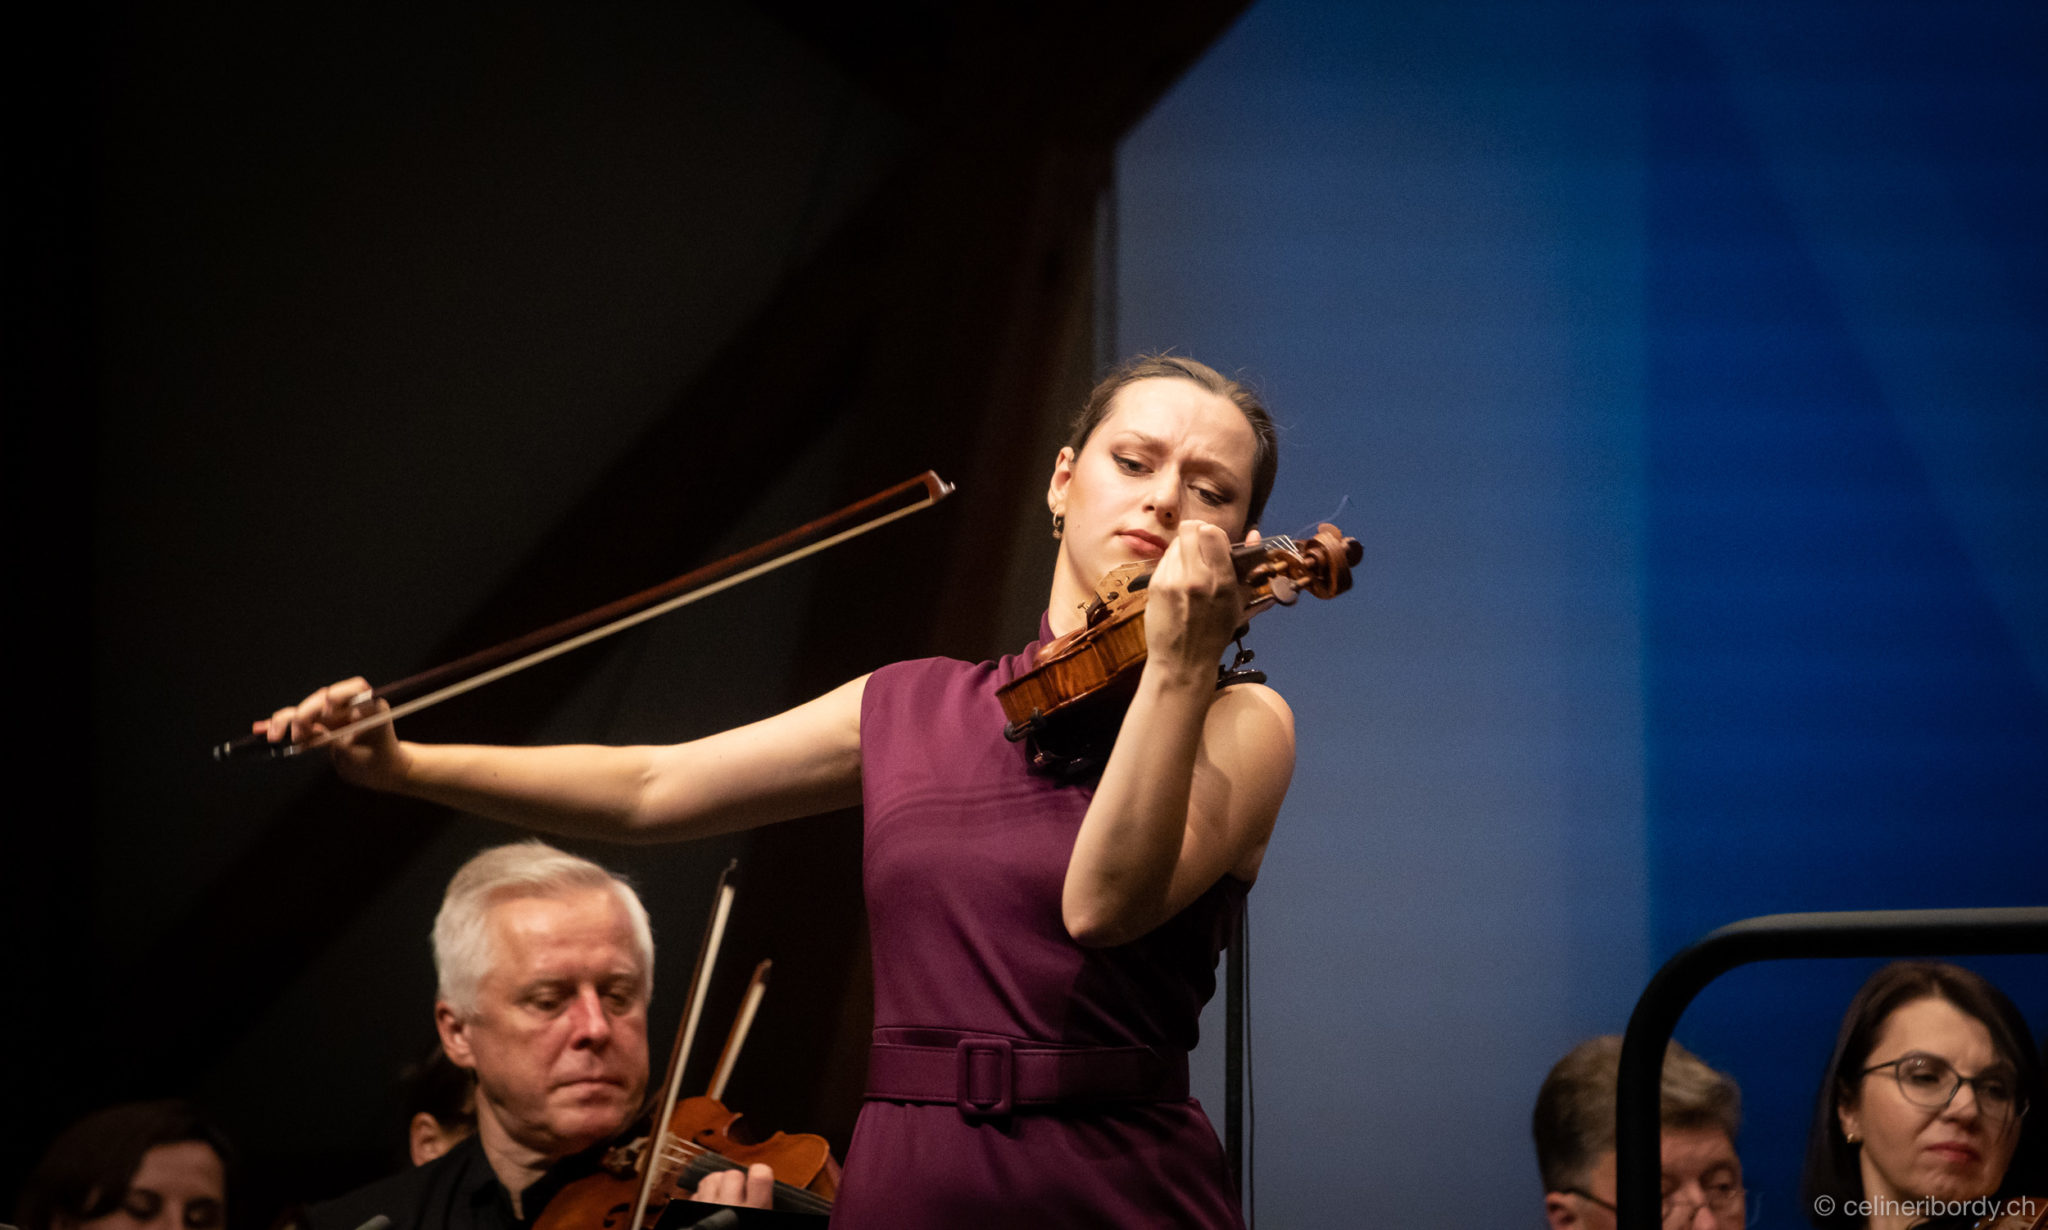 Sion Violon musique  Anna Agafia Egholm from Denmark has won the first  prize at the Tibor Varga International Violin Competition - Sion Violon  musique